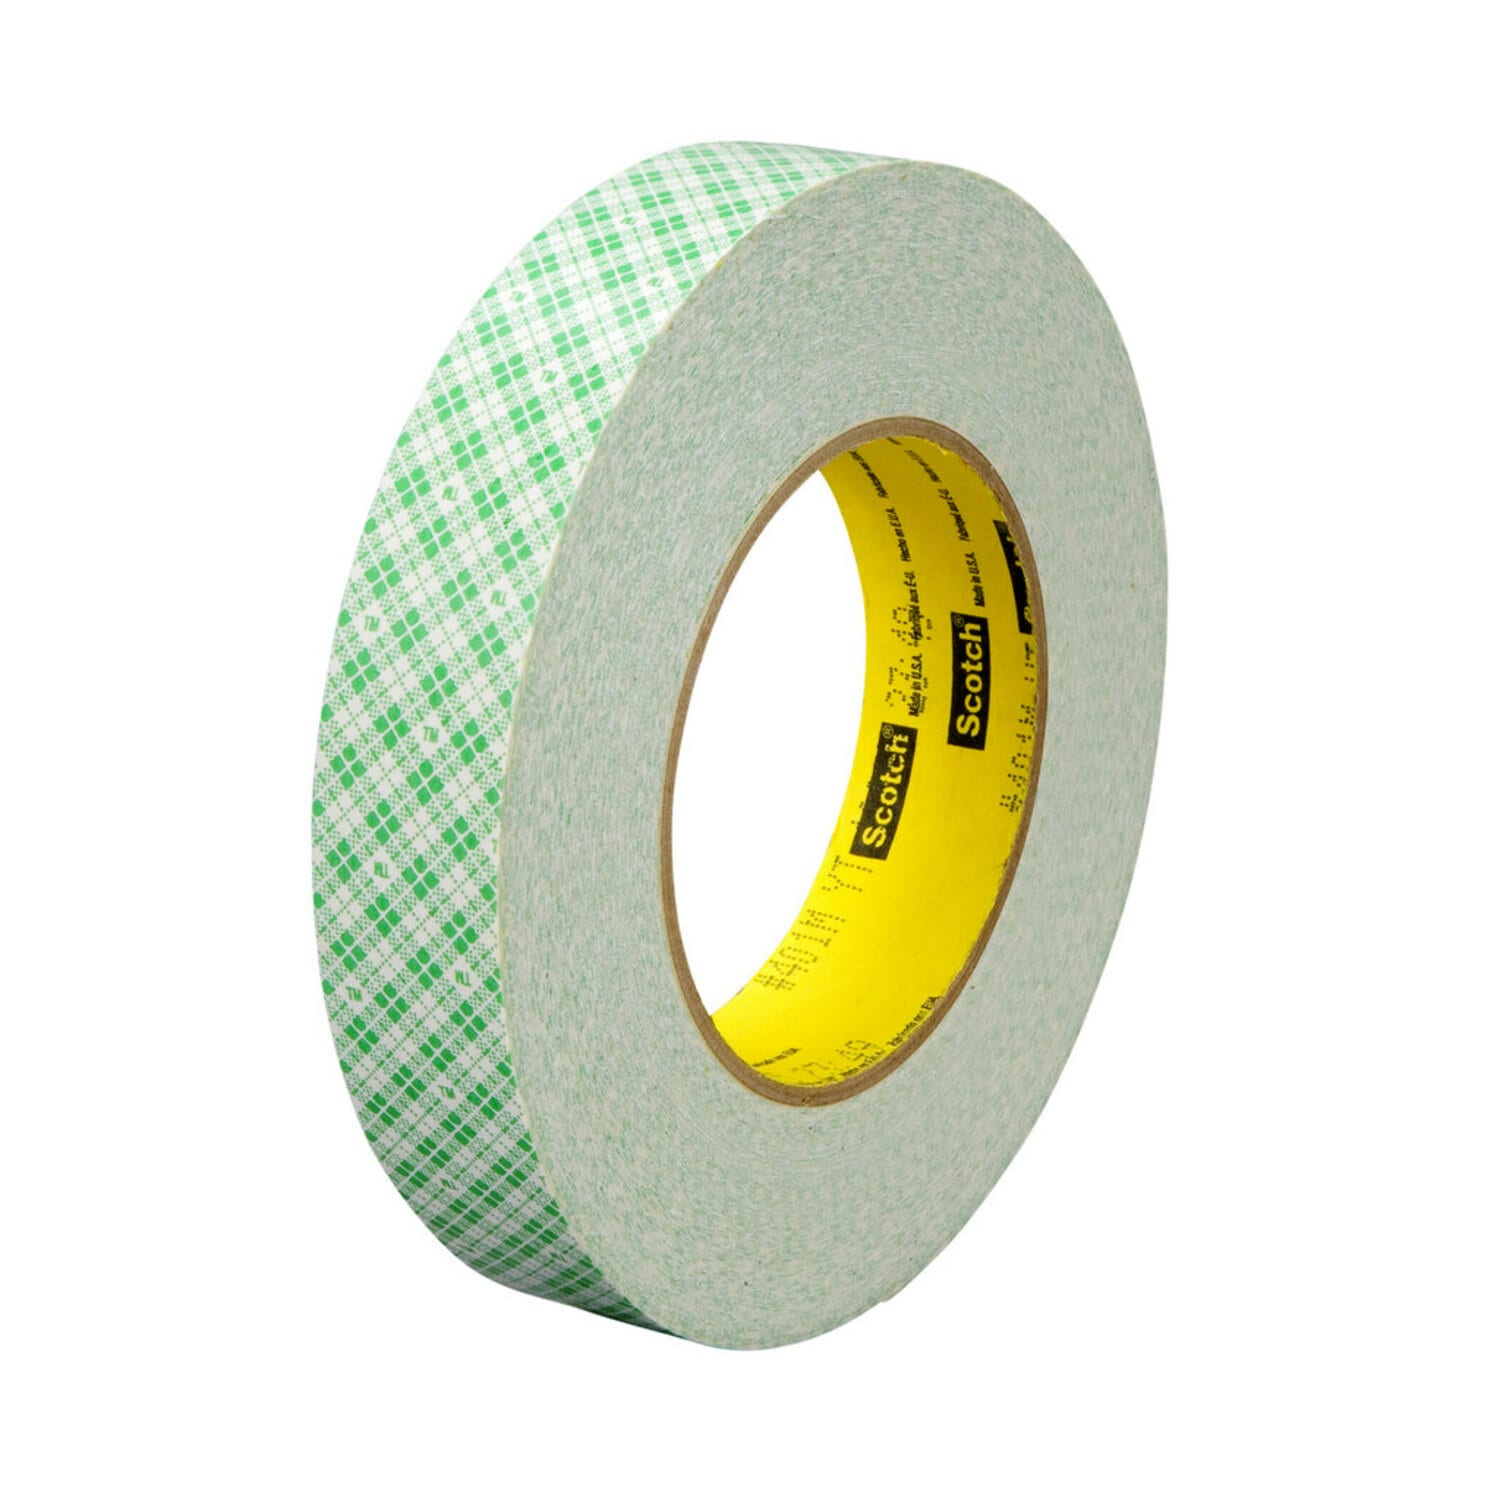 Scotch 665 Double-Sided Tape with C40 Dispenser, 0.5 x 900 - 6 pack